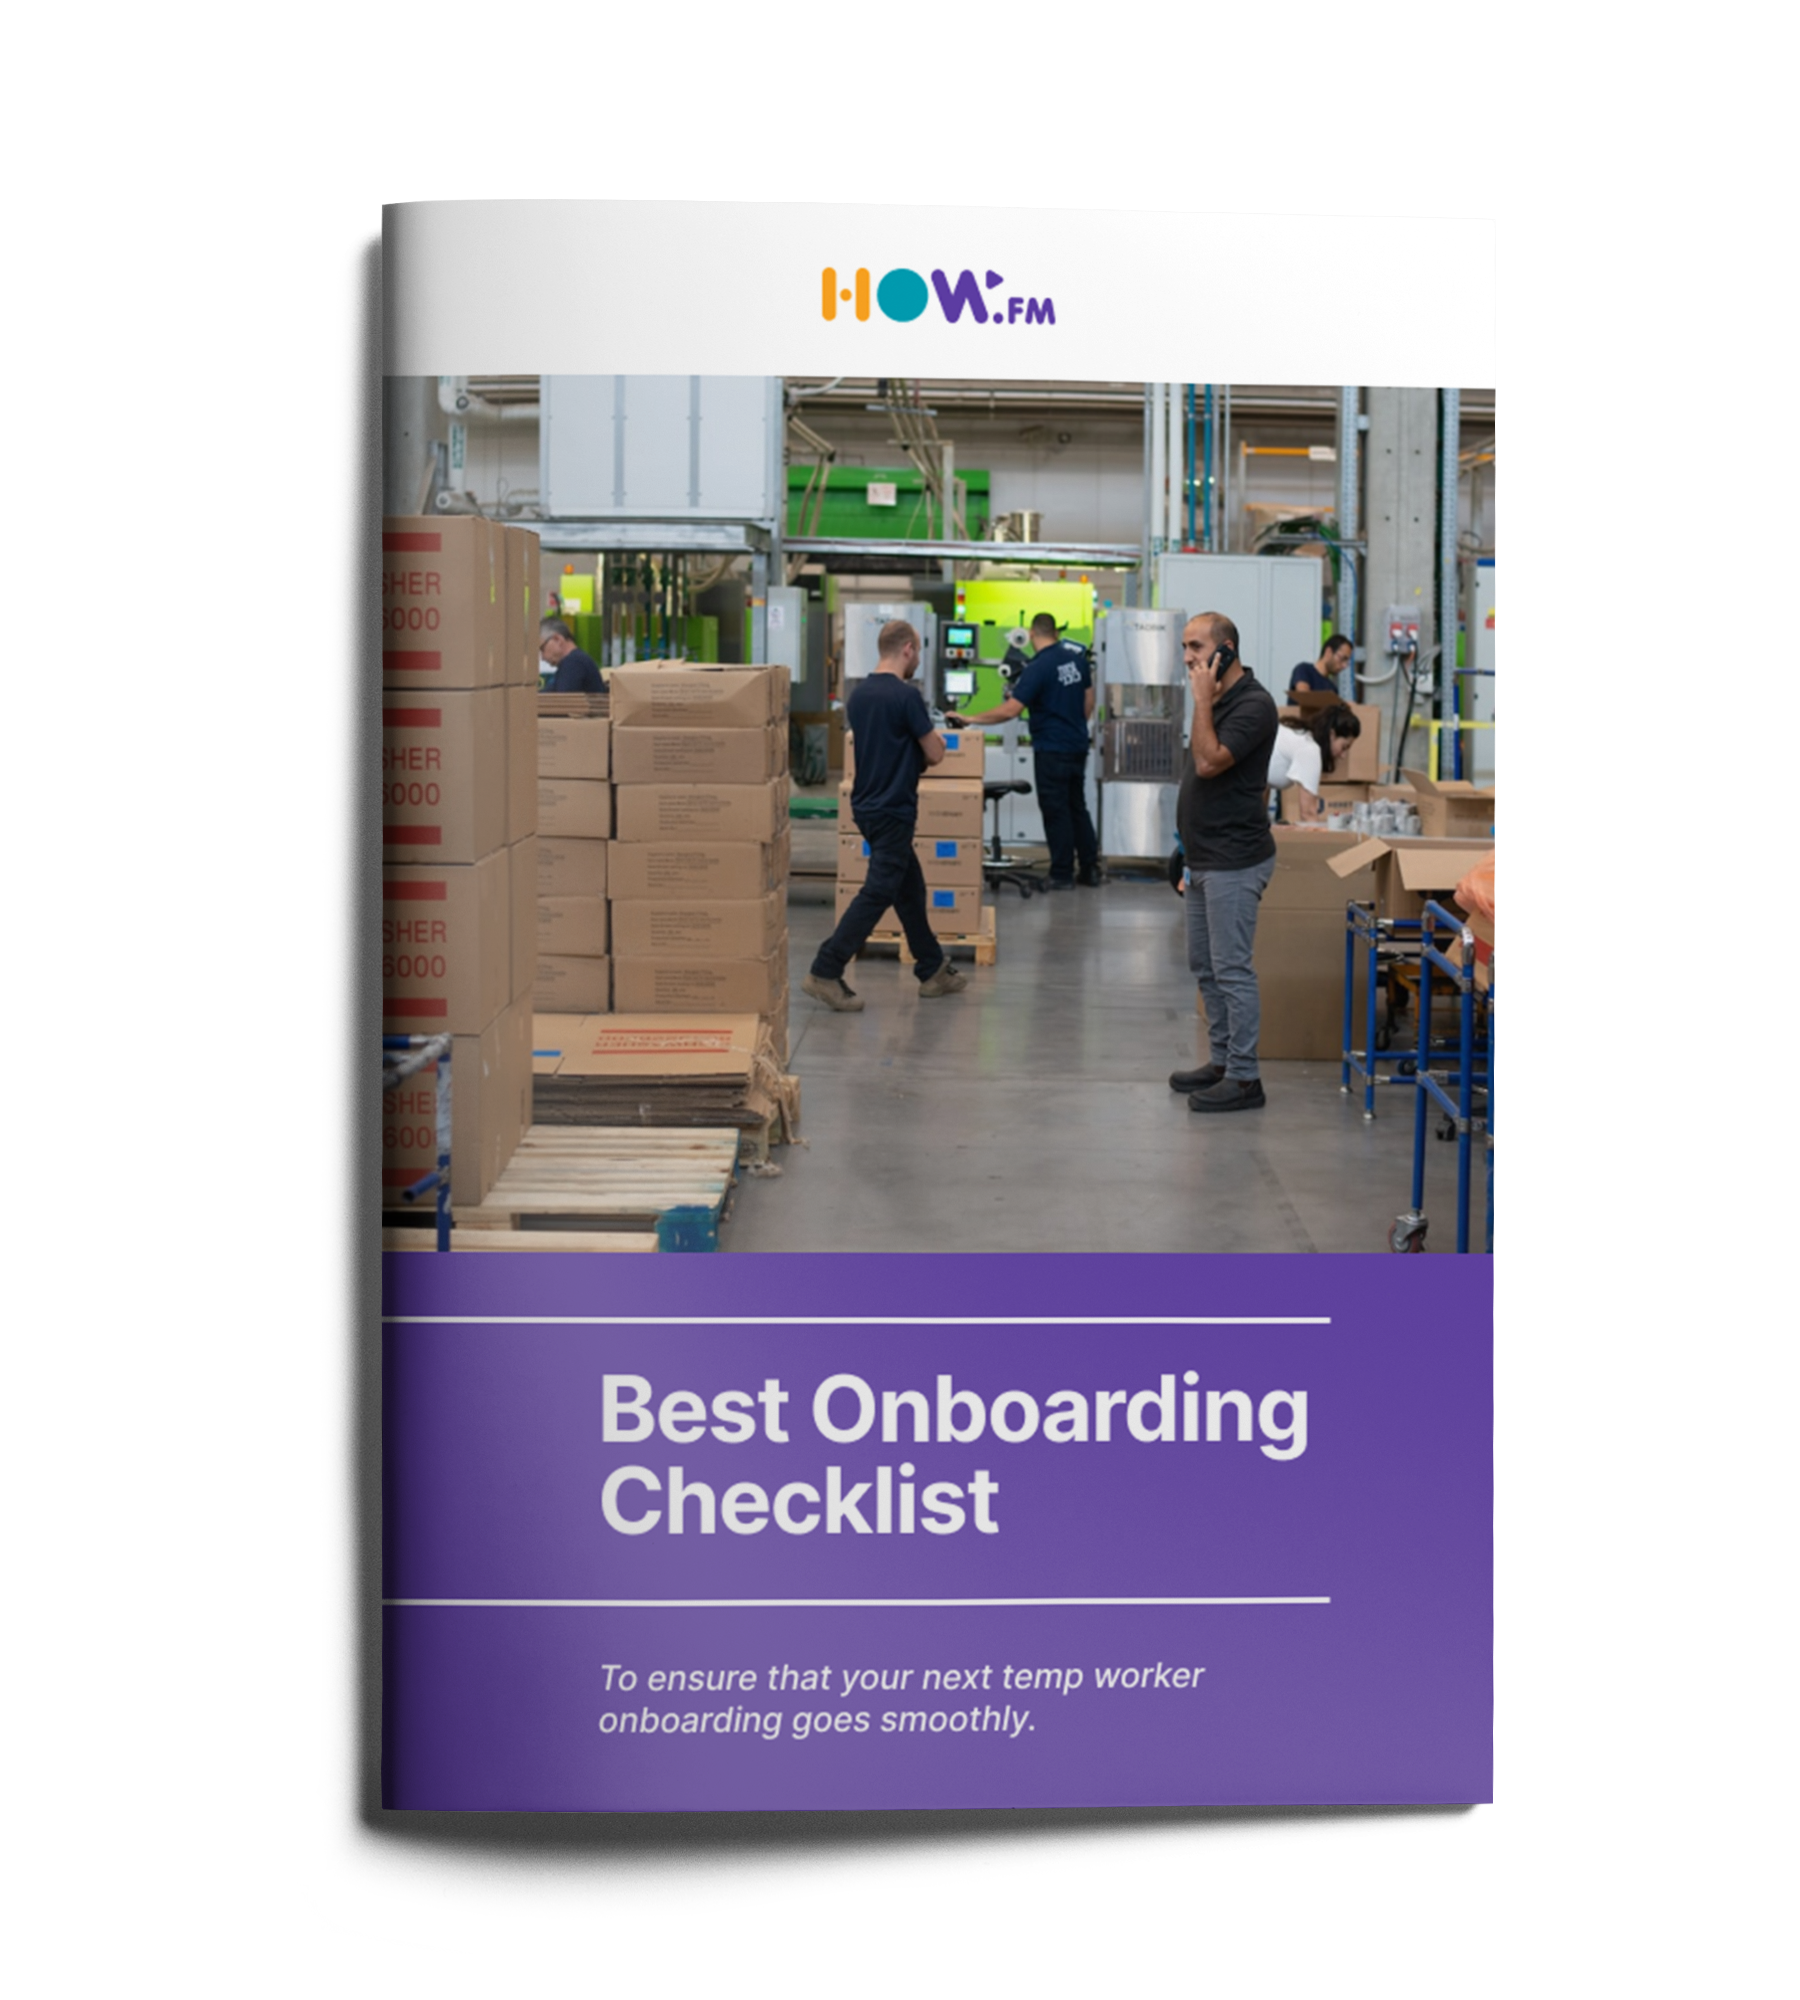 Onboarding checklist for temp workers